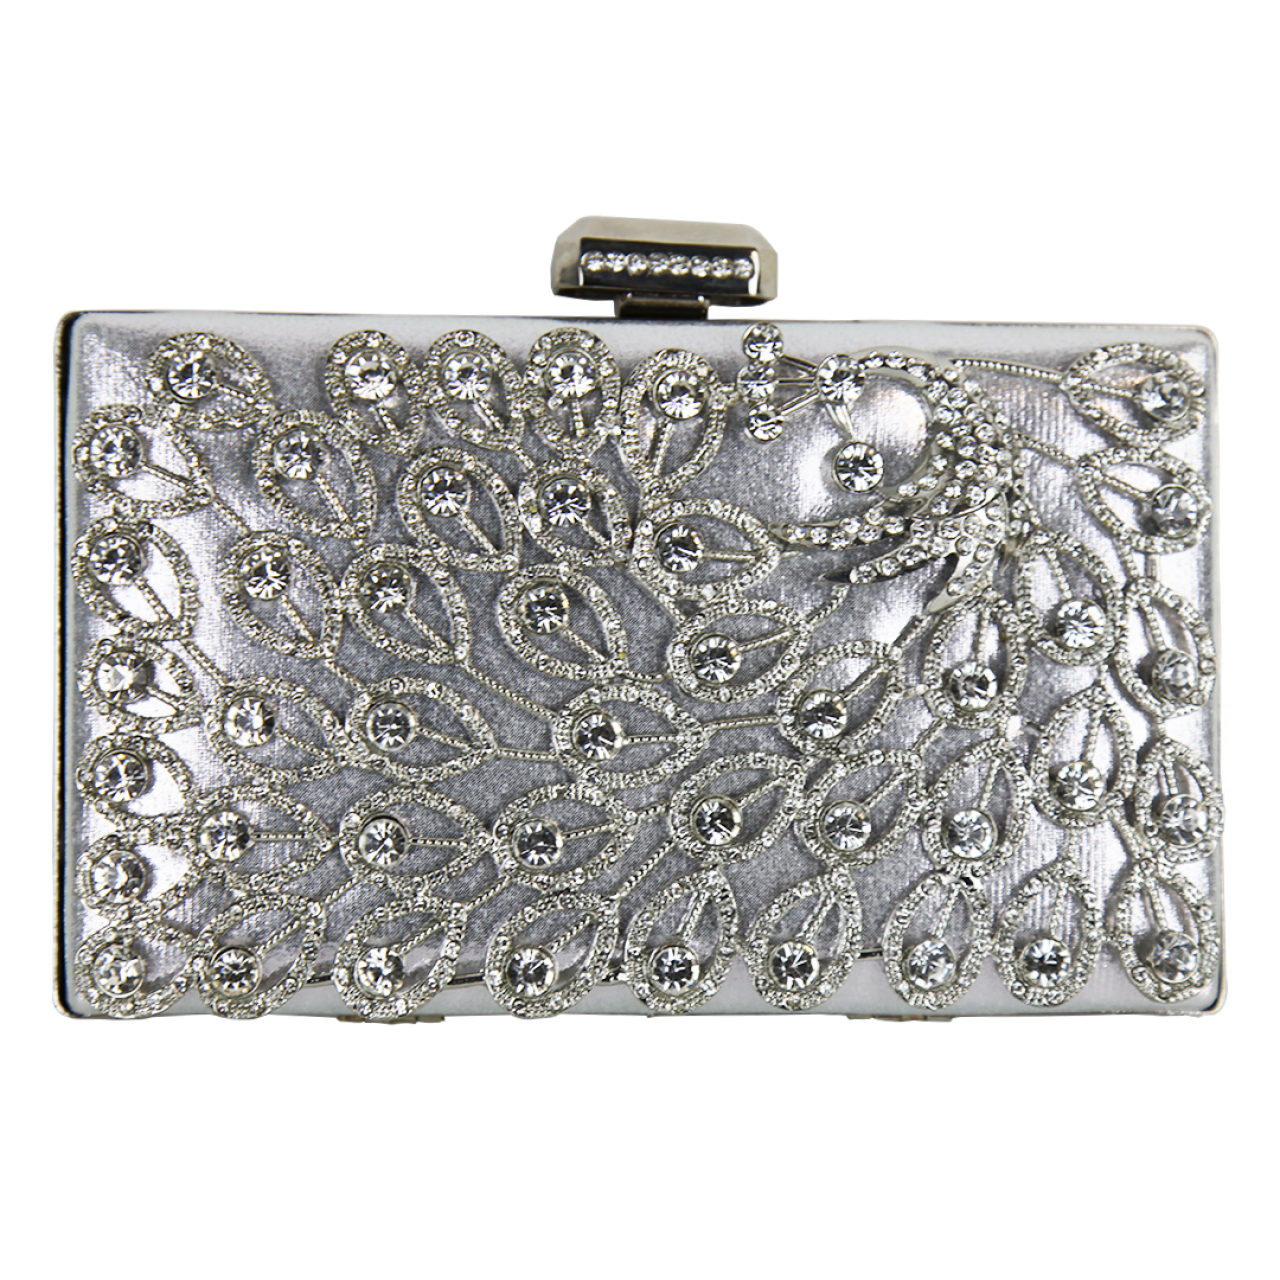 Embroidery Party Silver Clutch